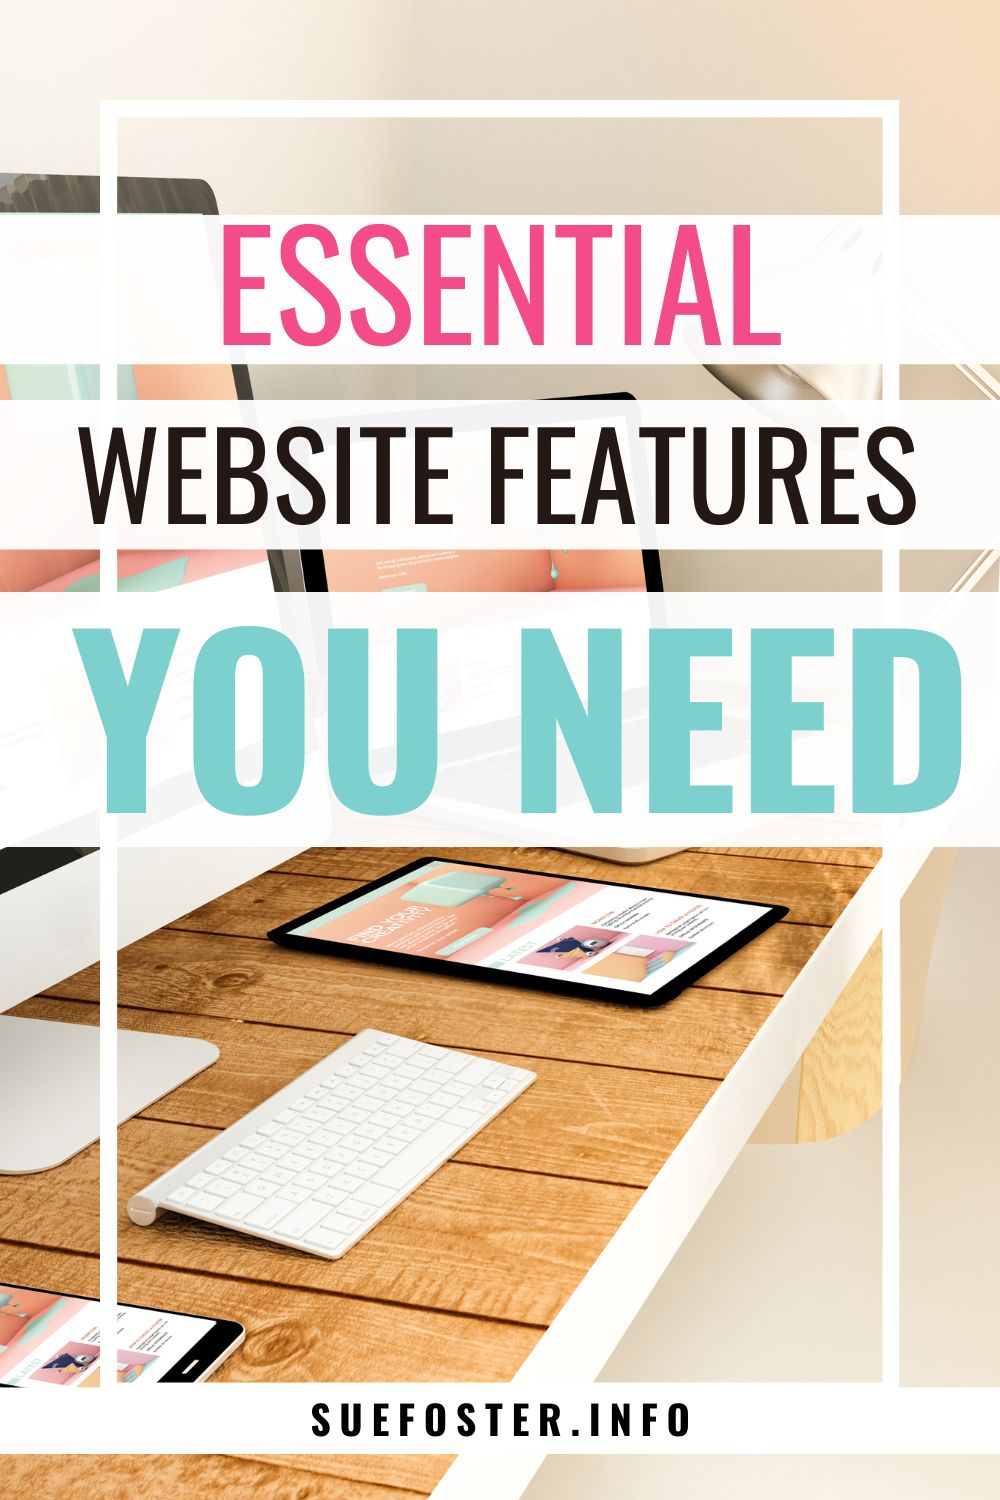 Looking clean and easy to use is just the start of what it takes to have a great website. Make sure your website has these essential features.